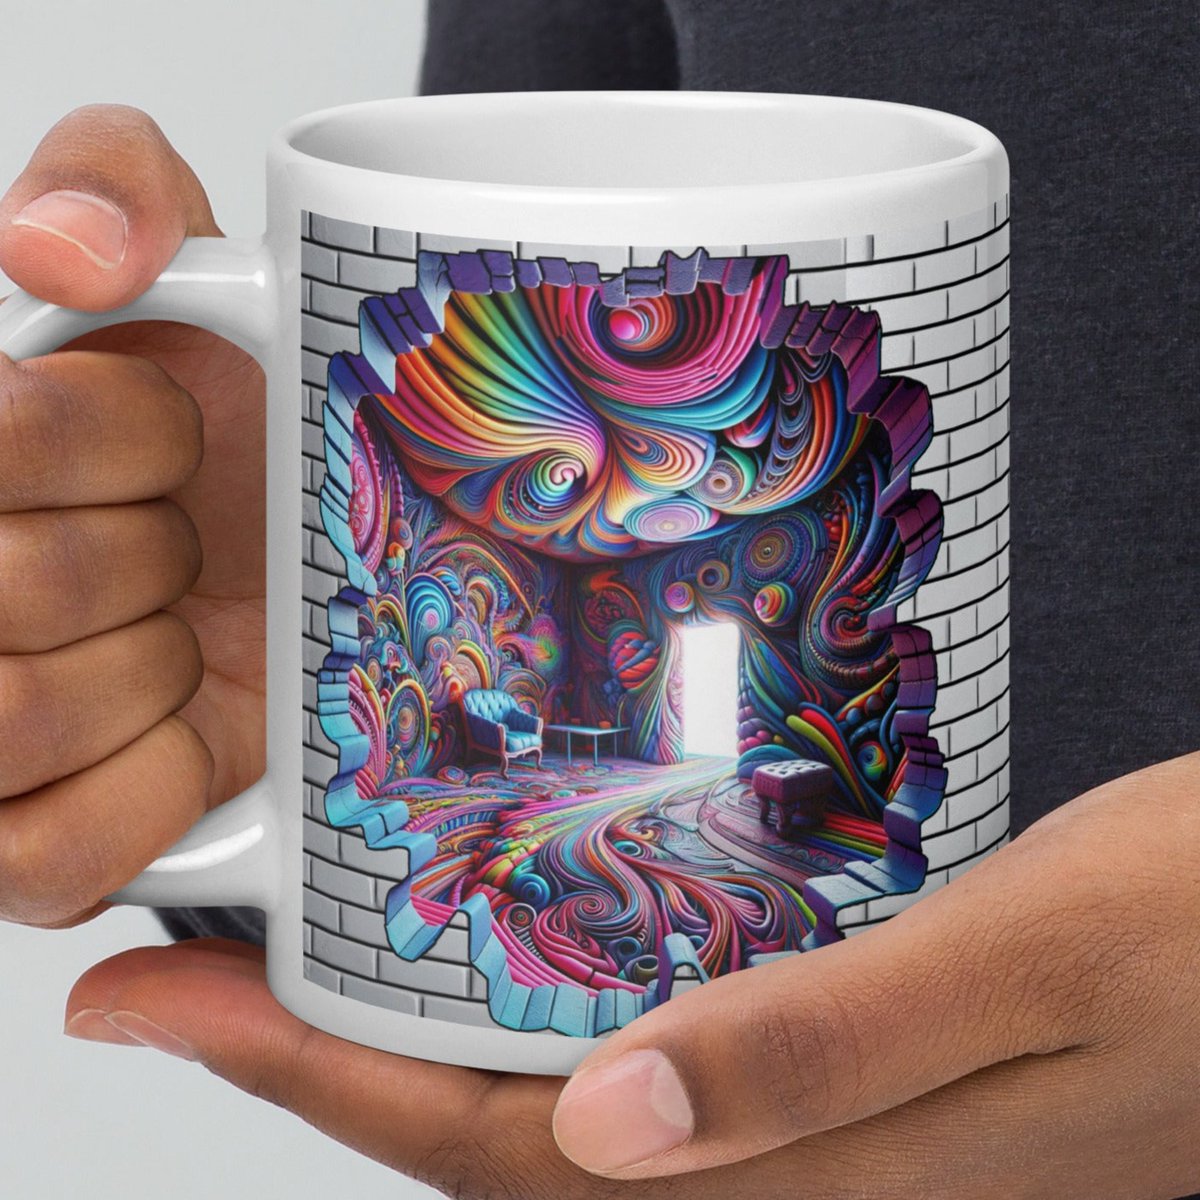 Start your day with a splash of color! Our Psychedelic Escape Mug features a stunning 3D design that's perfect for your morning brew. ☕🌟 #PsychedelicArt #CoffeeLovers #MorningVibes
shhcreations.com/products/psych…